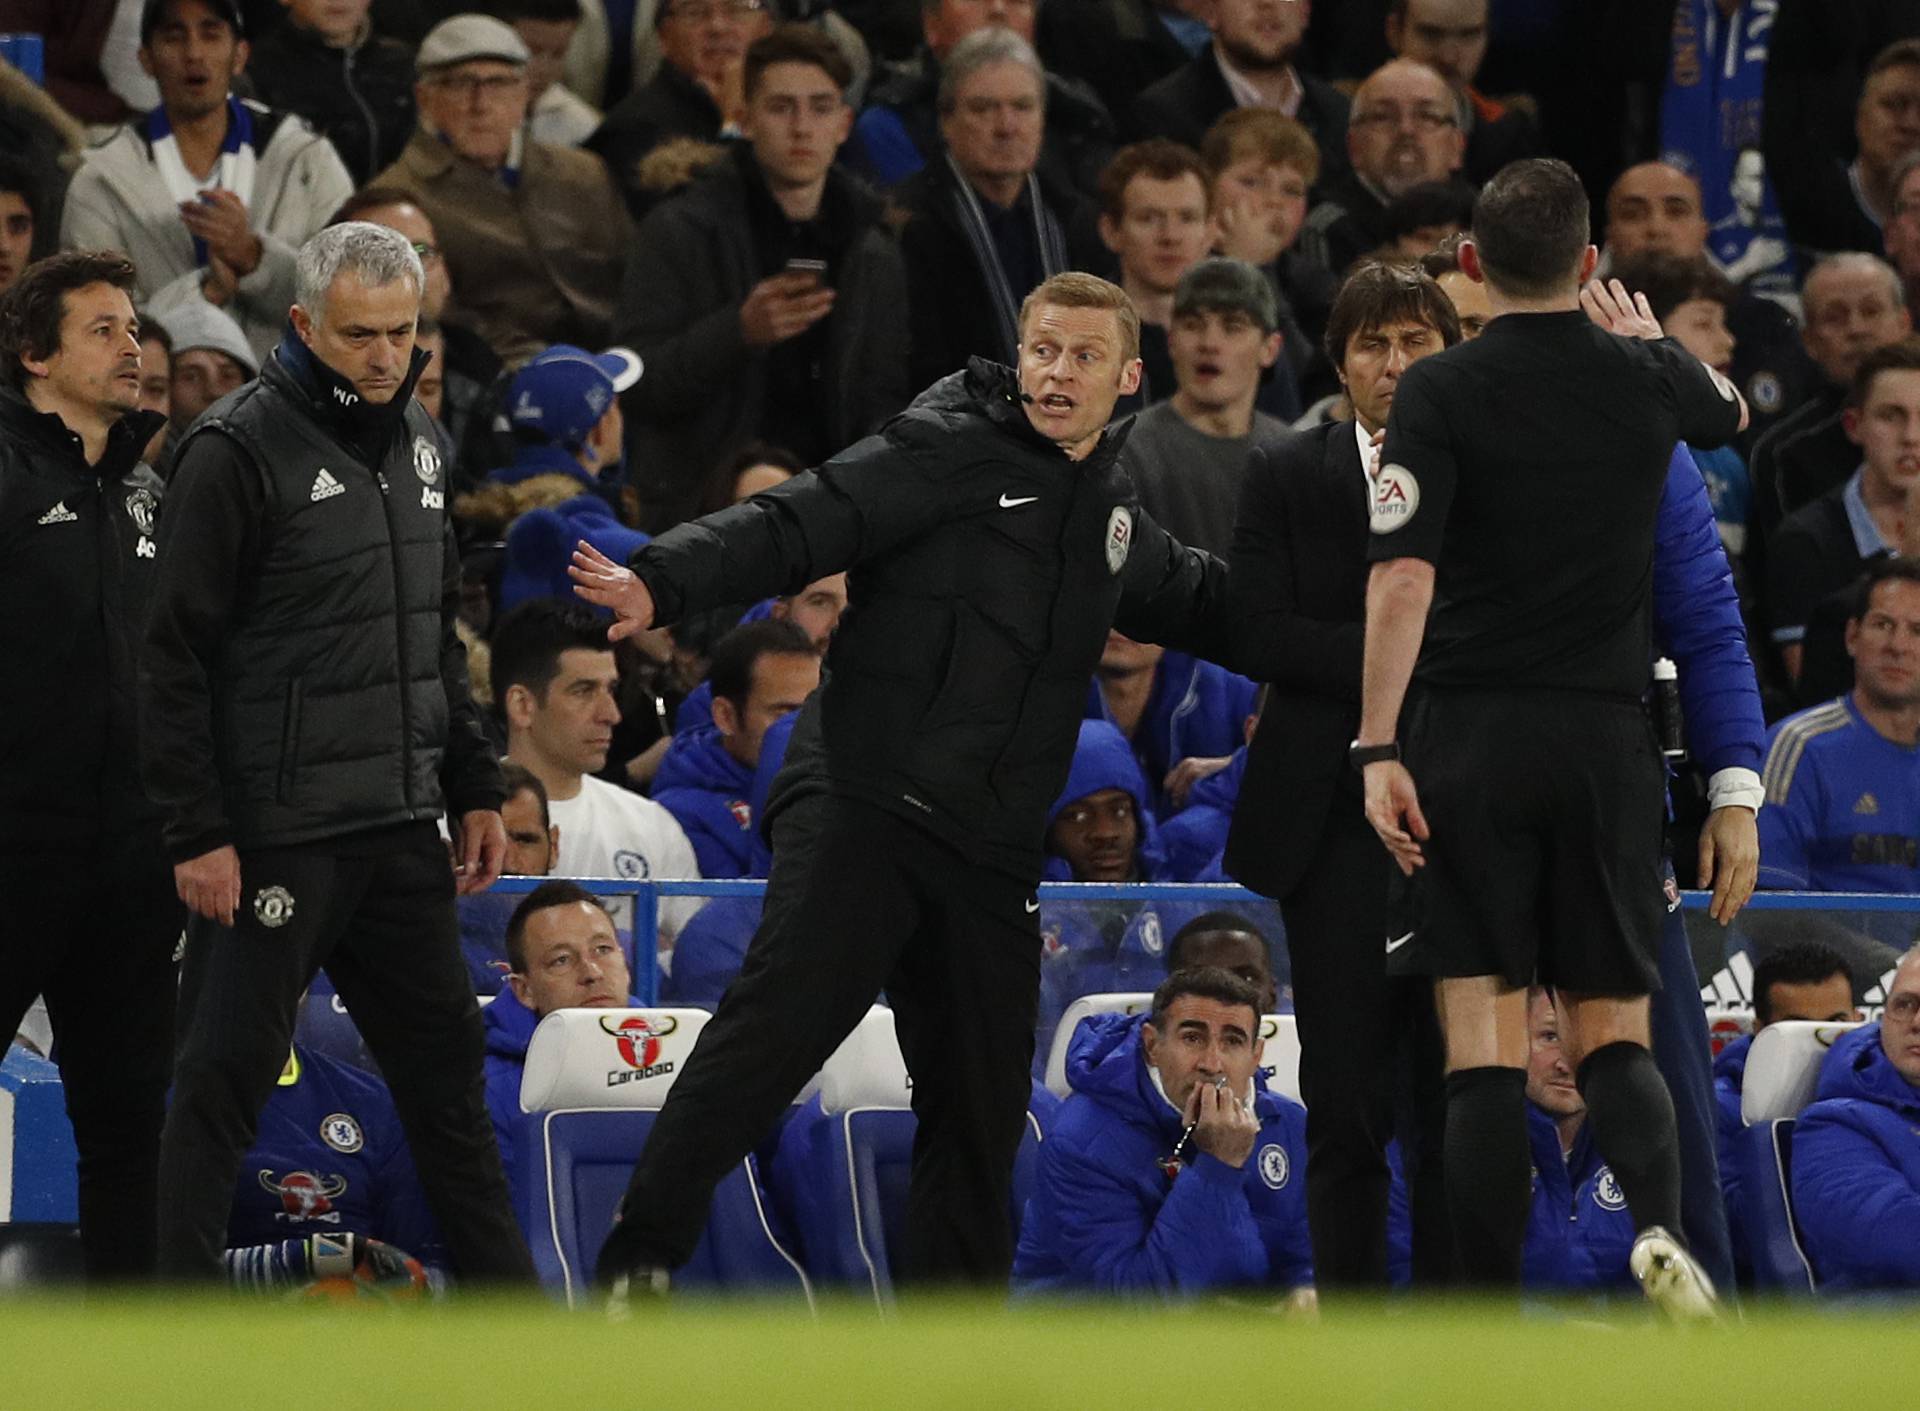 Manchester United manager Jose Mourinho and Chelsea manager Antonio Conte clash